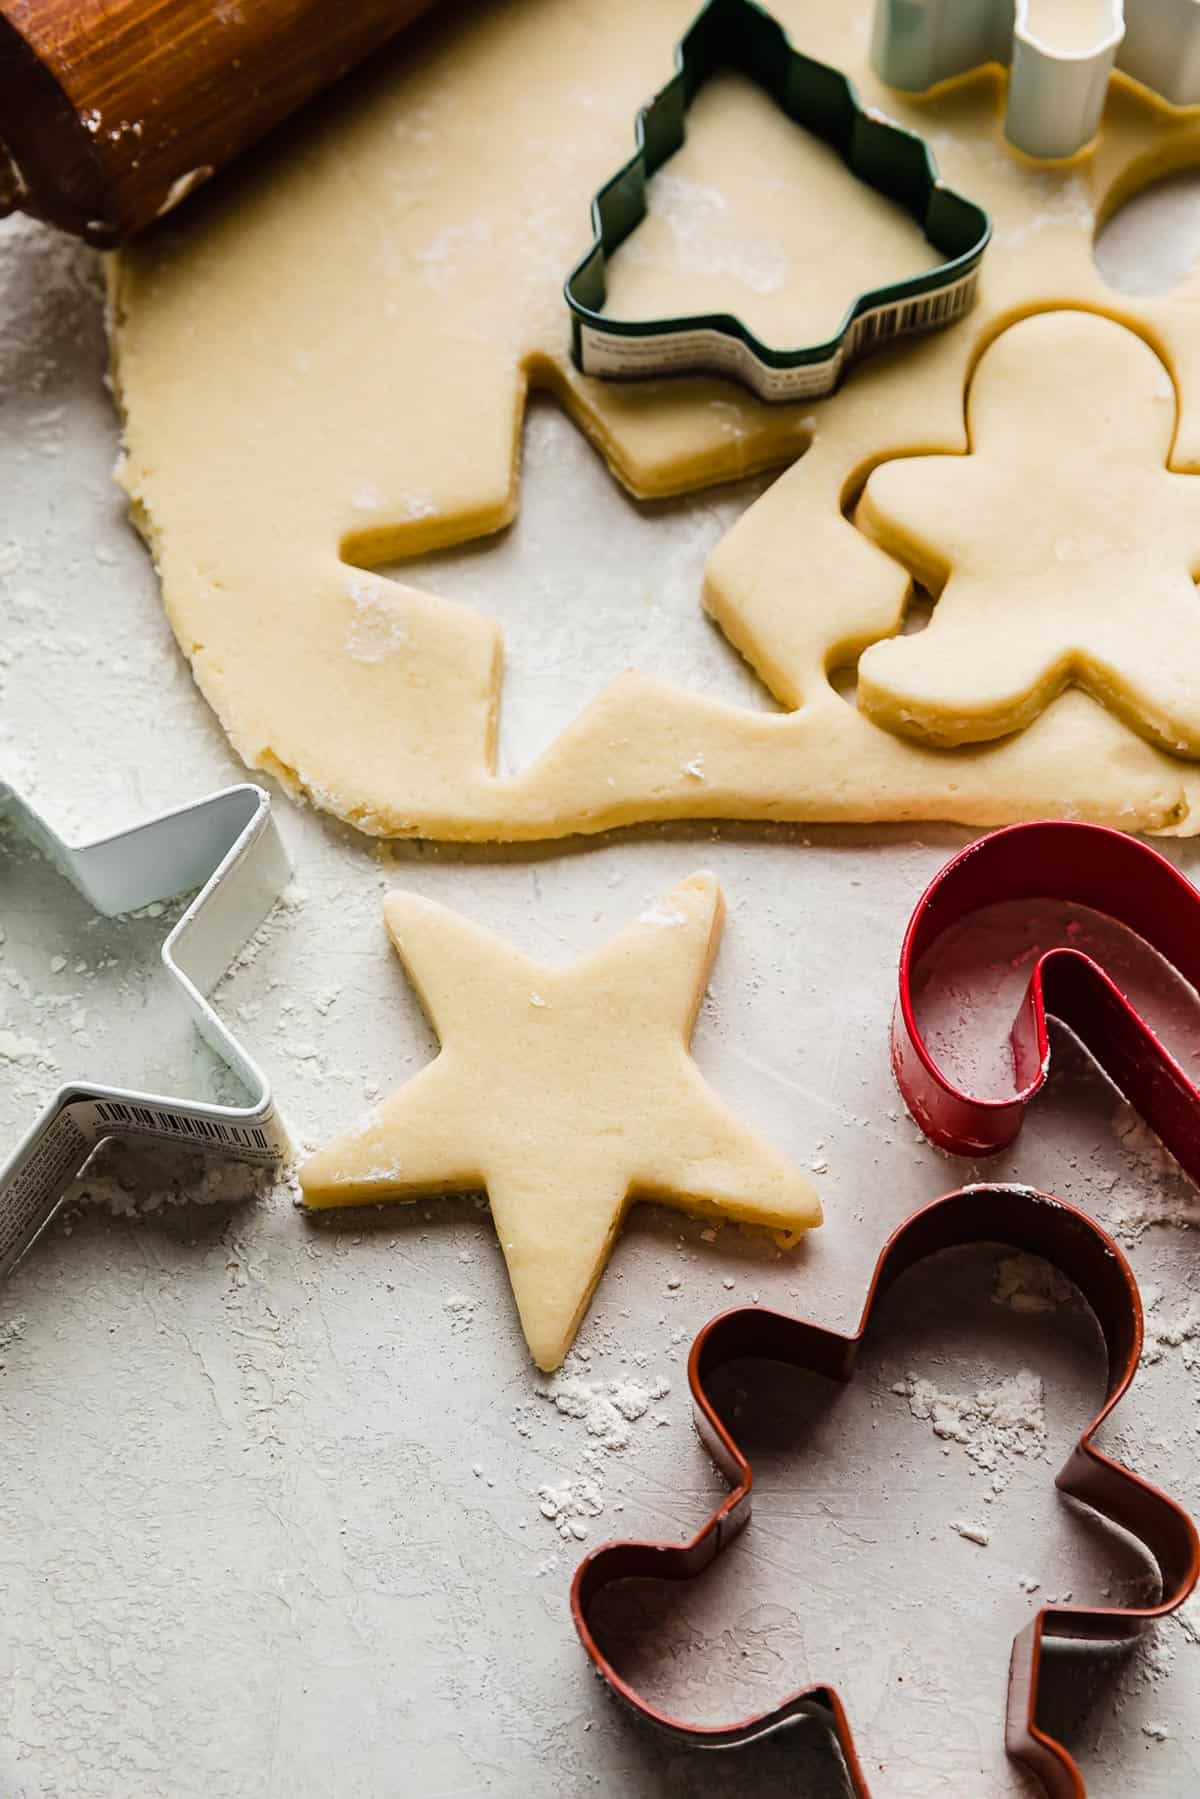 Sugar cookie dough rolled out on a gray surface with a star shape cut out from the dough.